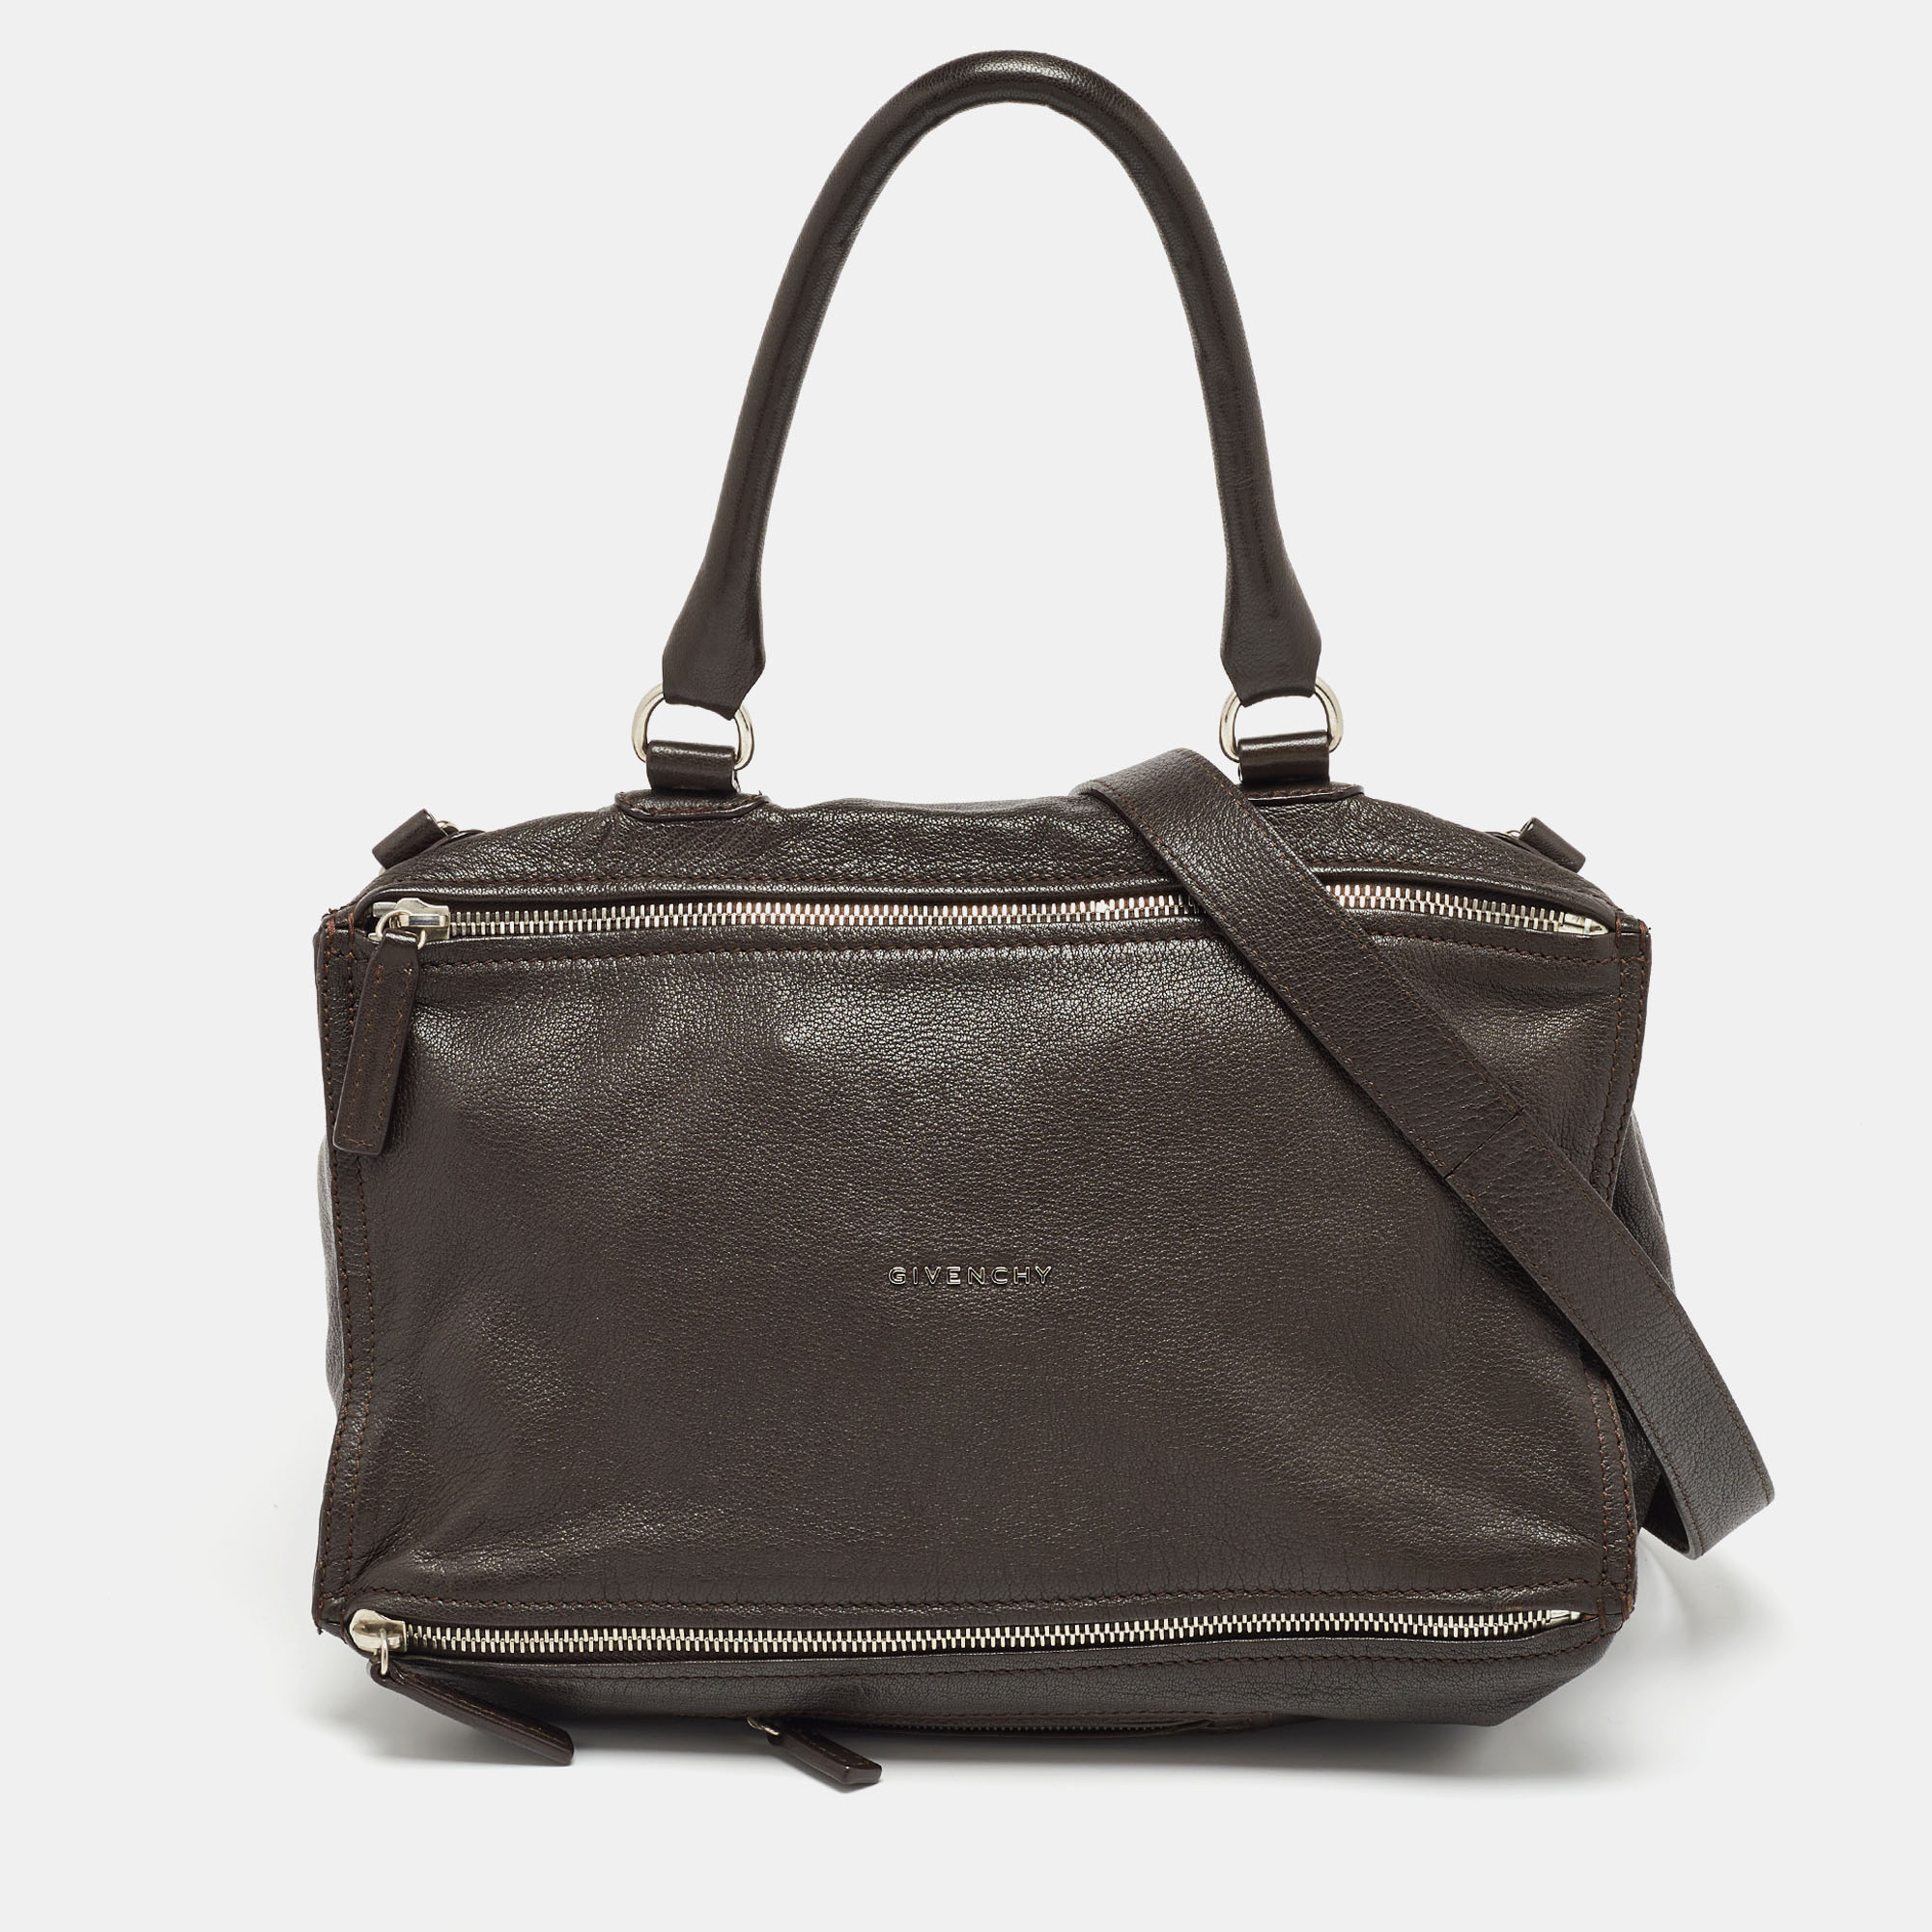 Pre-owned Givenchy Brown Leather Pandora Top Handle Bag